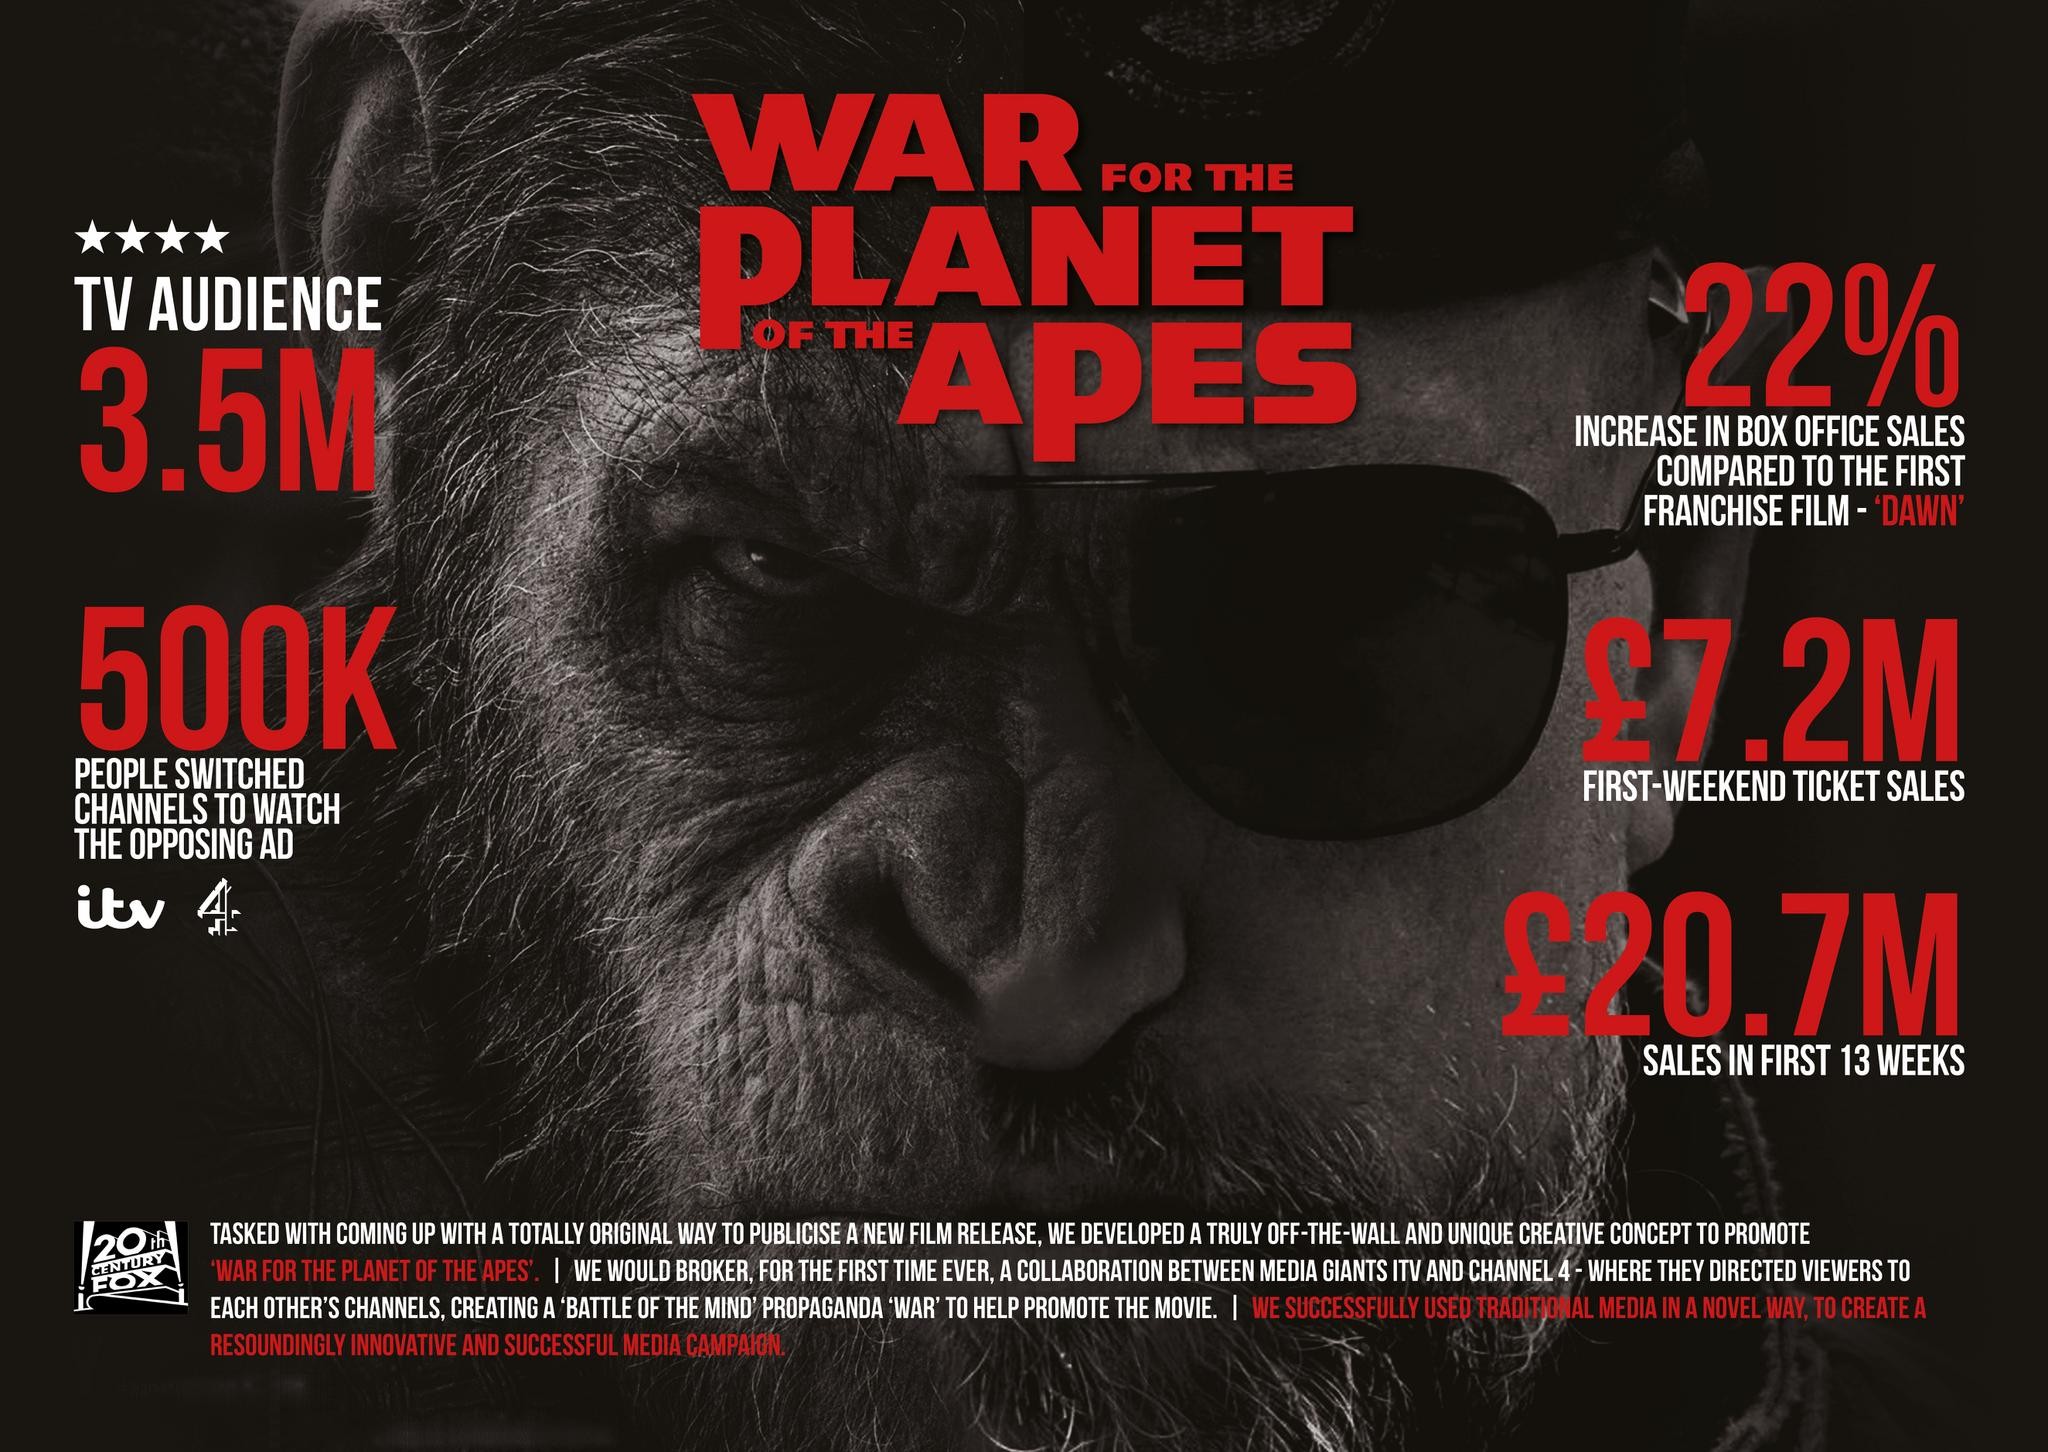 Fox - War for the Planet of the Apes